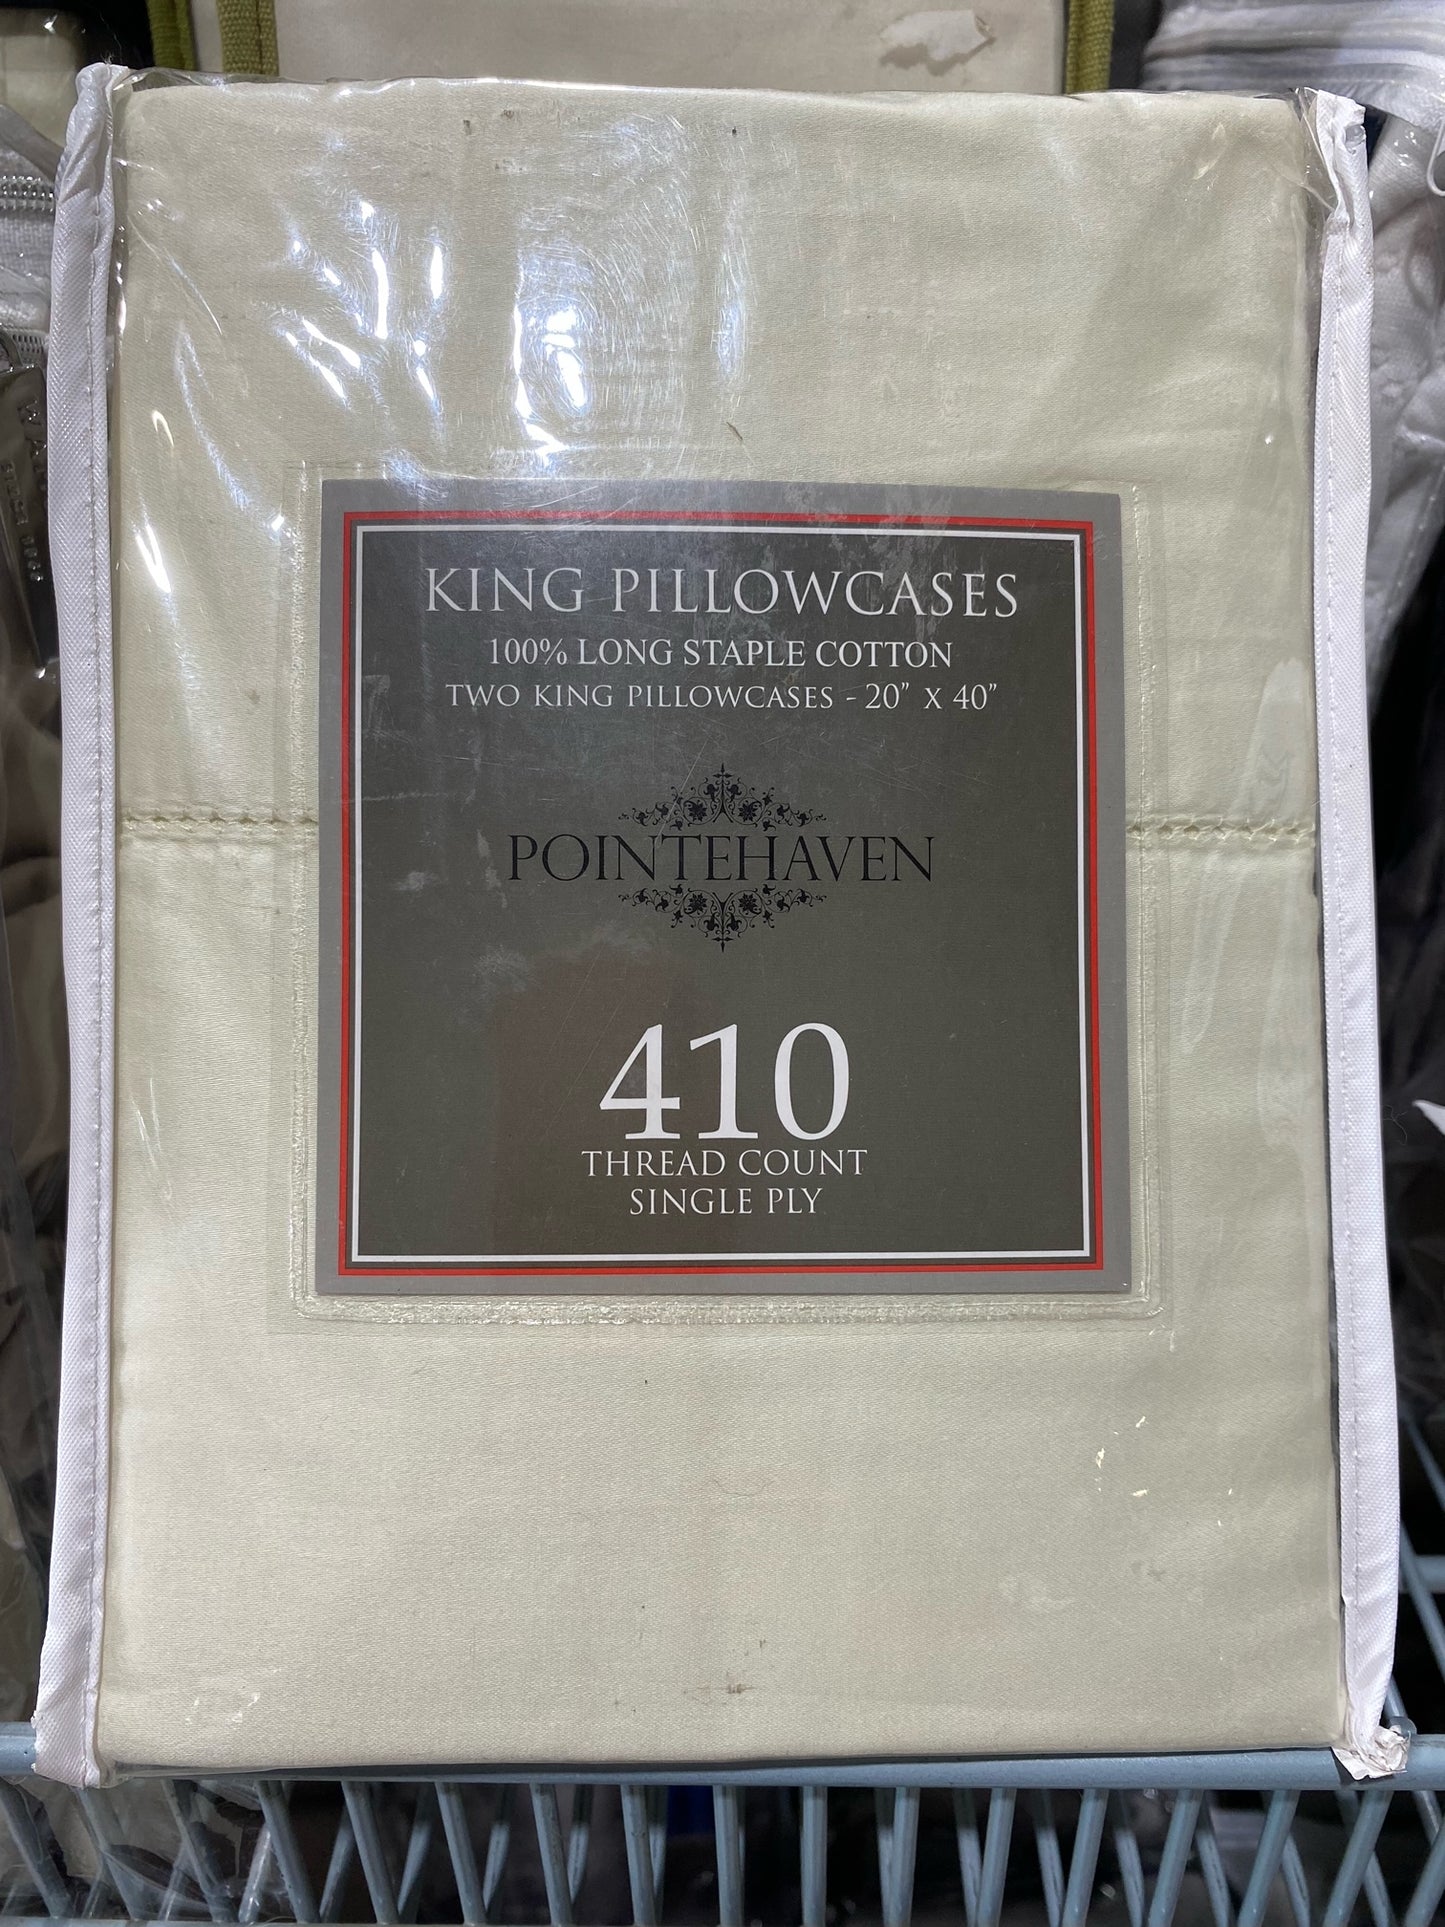 Pointehaven 2-pack 410 Thread Count Cotton King Pillowcase in Ivory